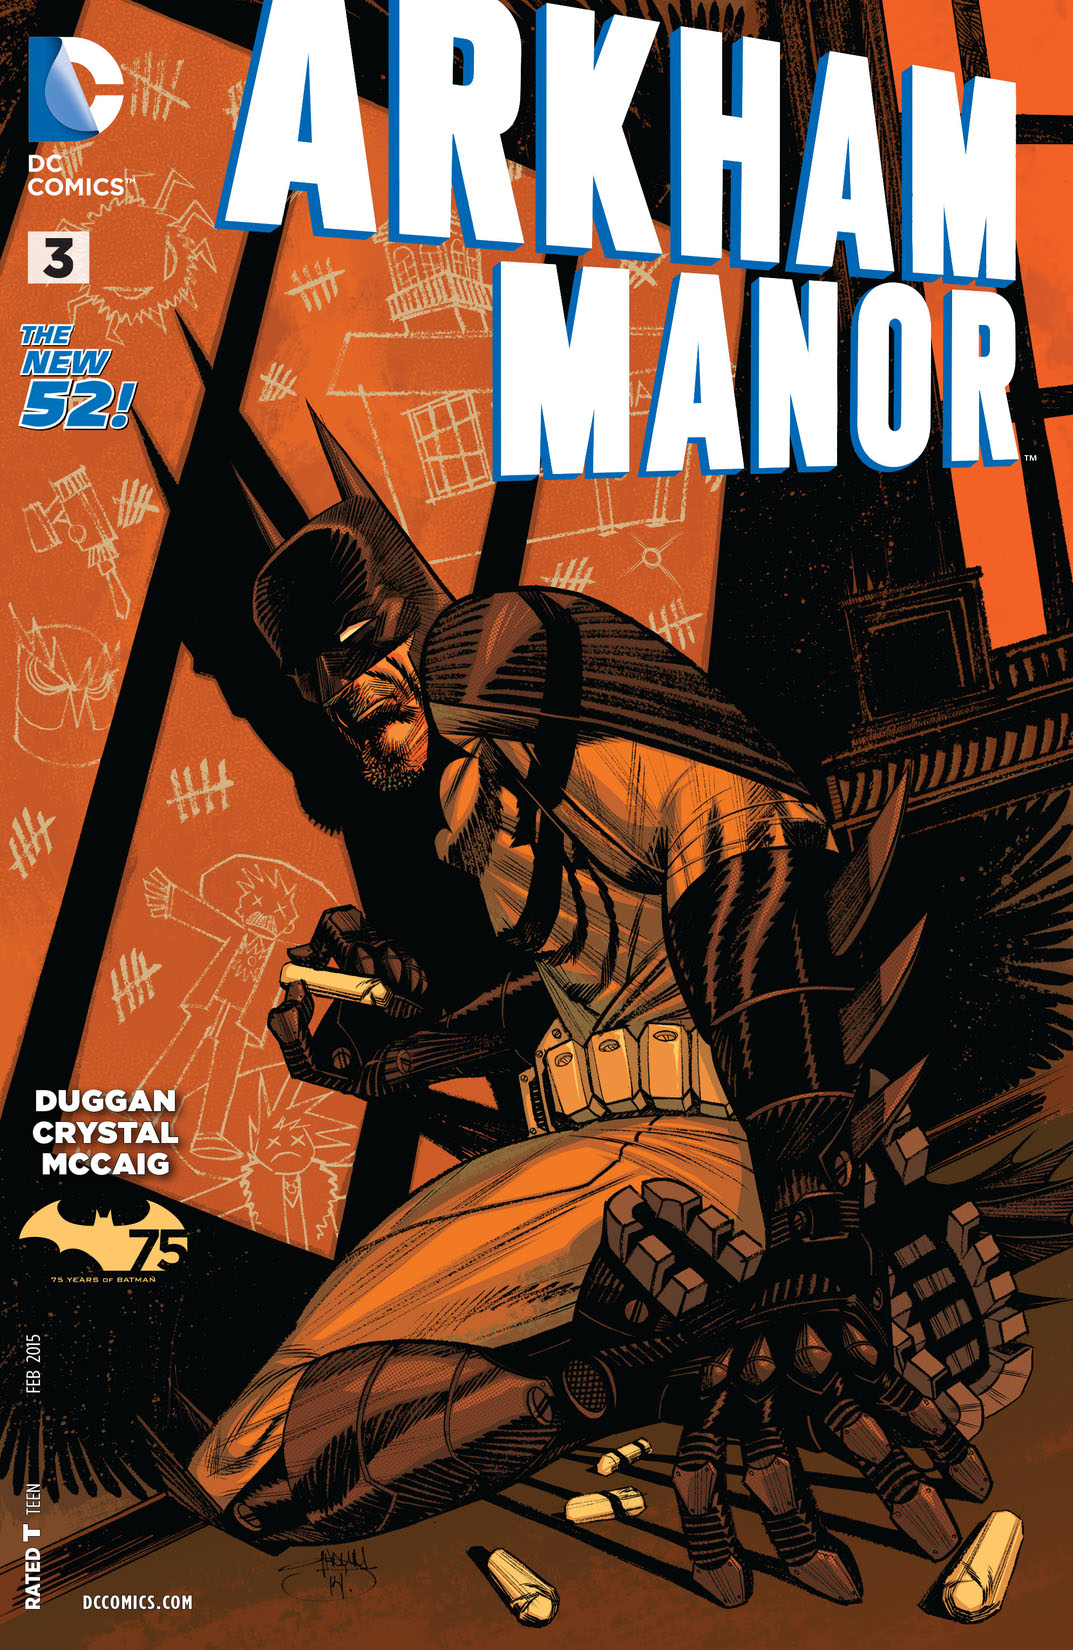 Arkham Manor #3 preview images